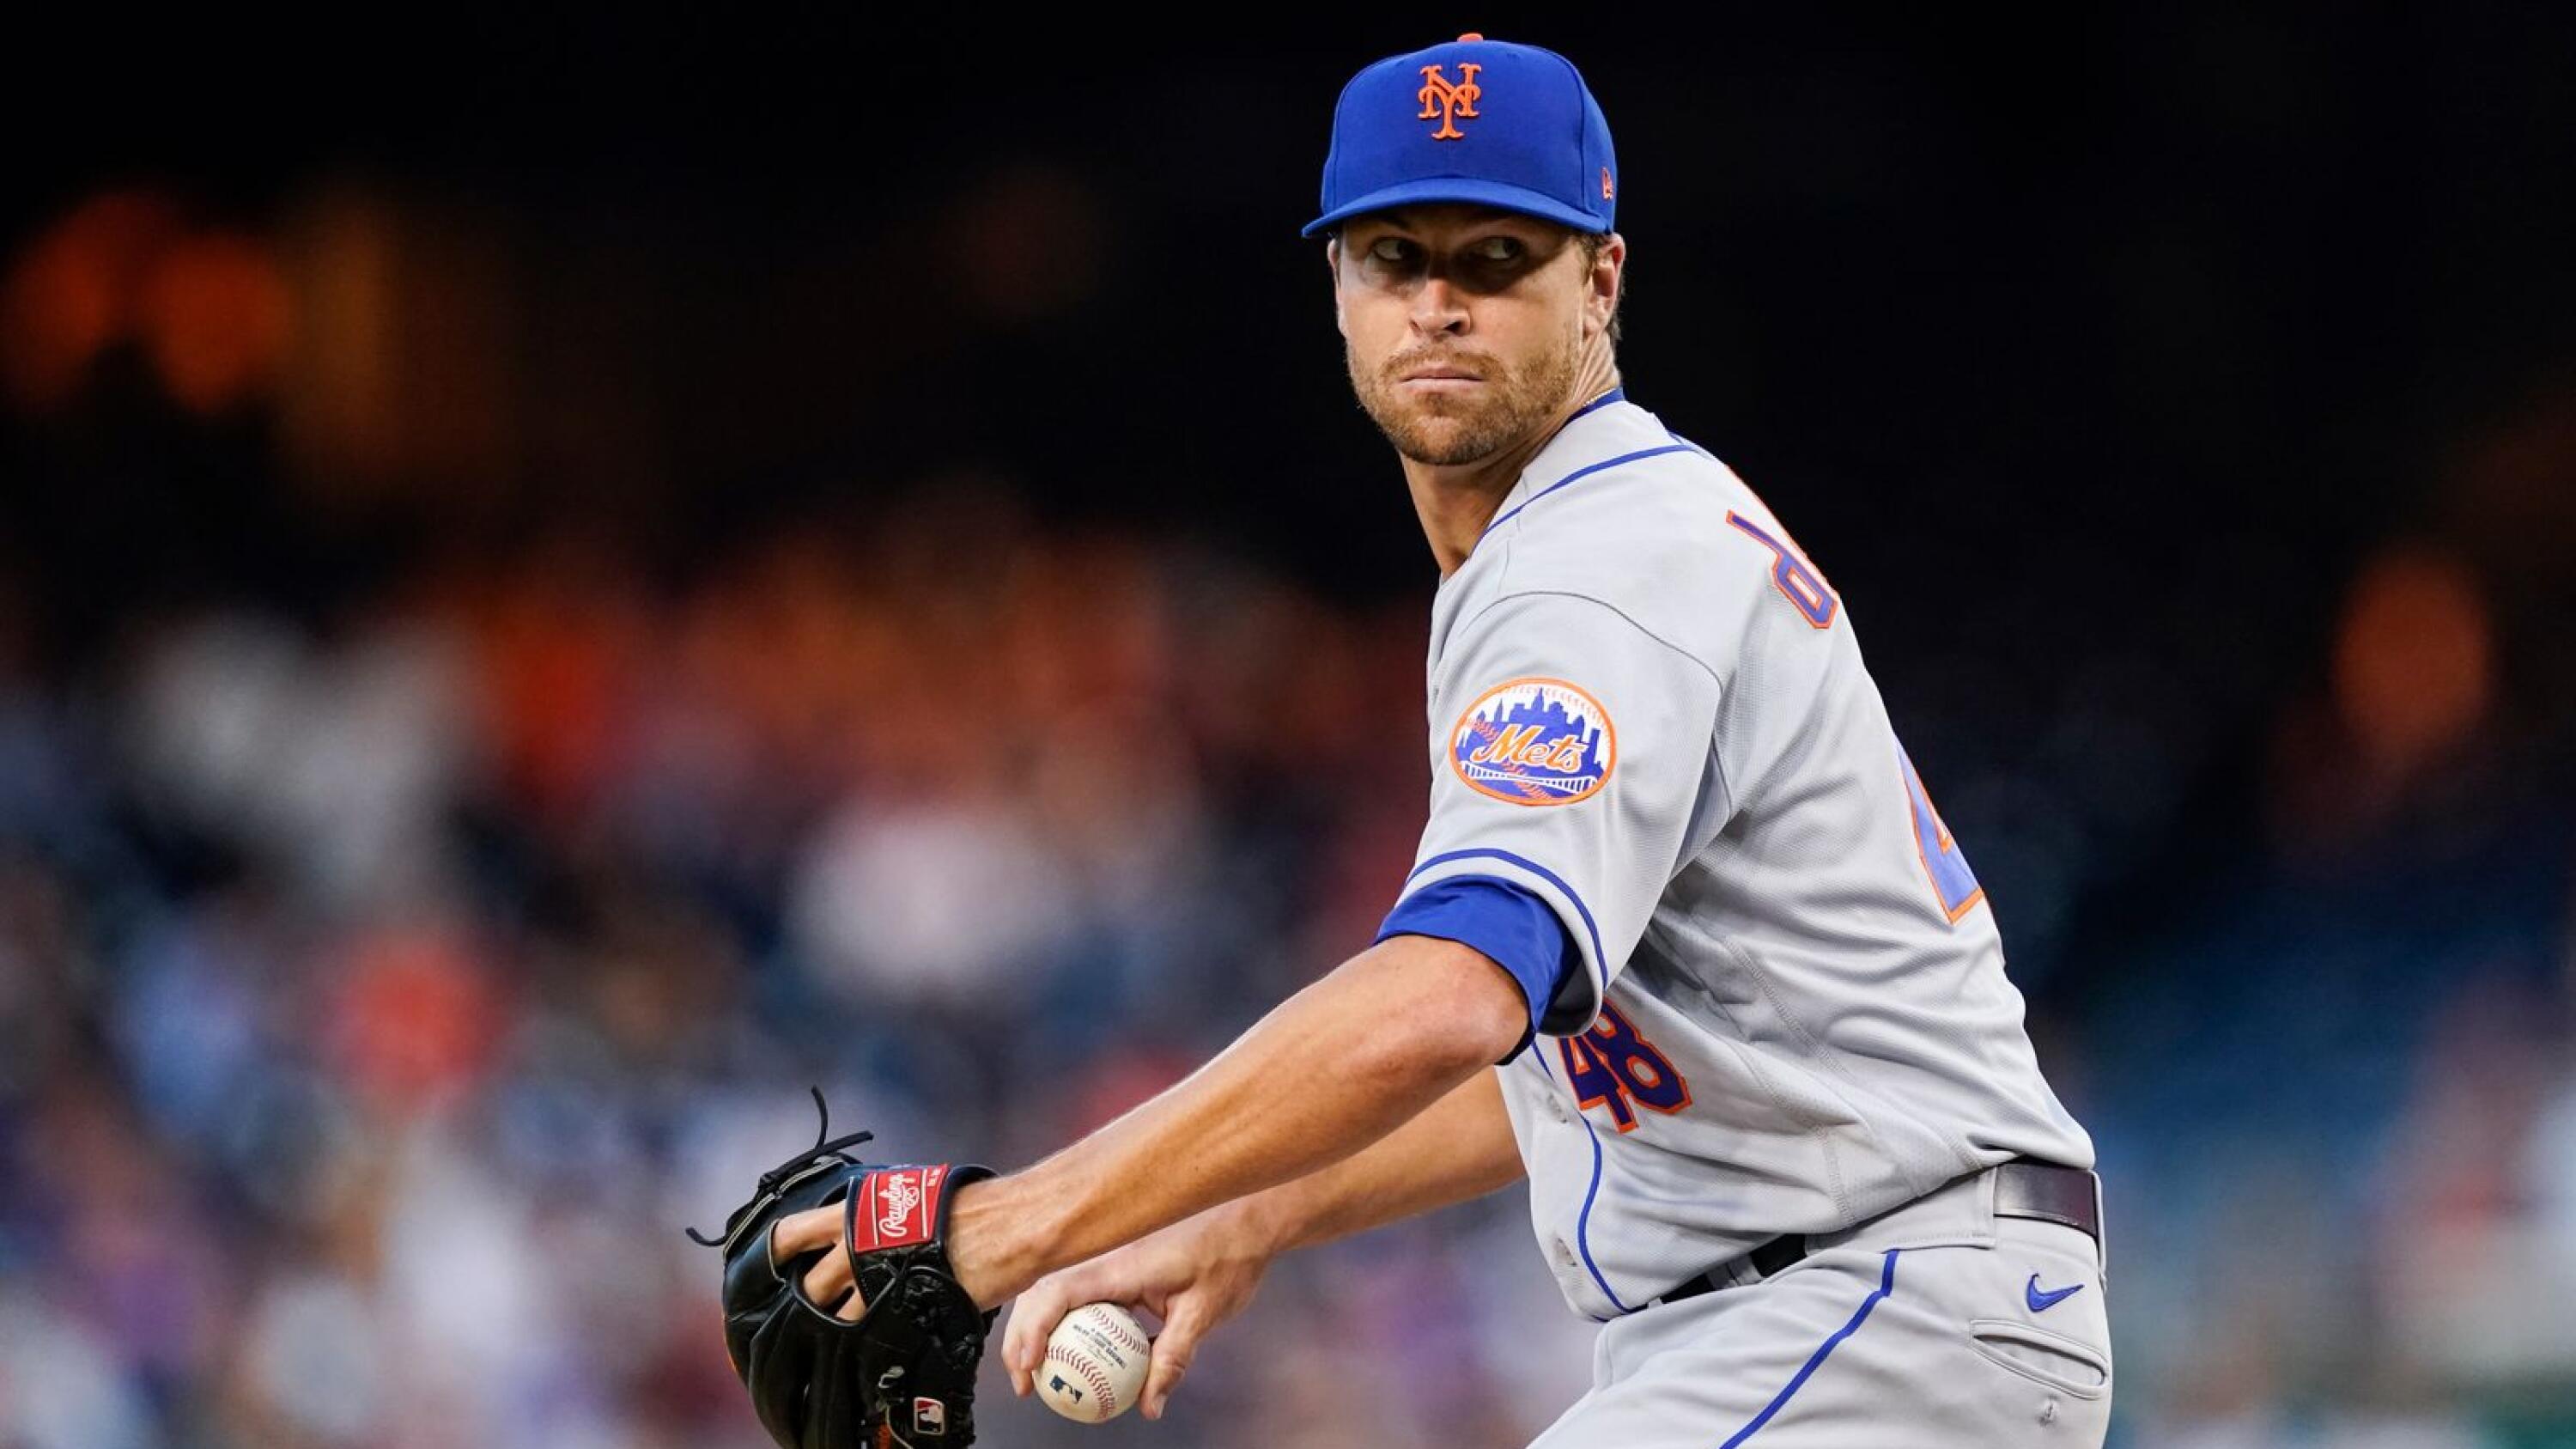 Mets fans, General Manager prepare for Jacob deGrom's sold-out